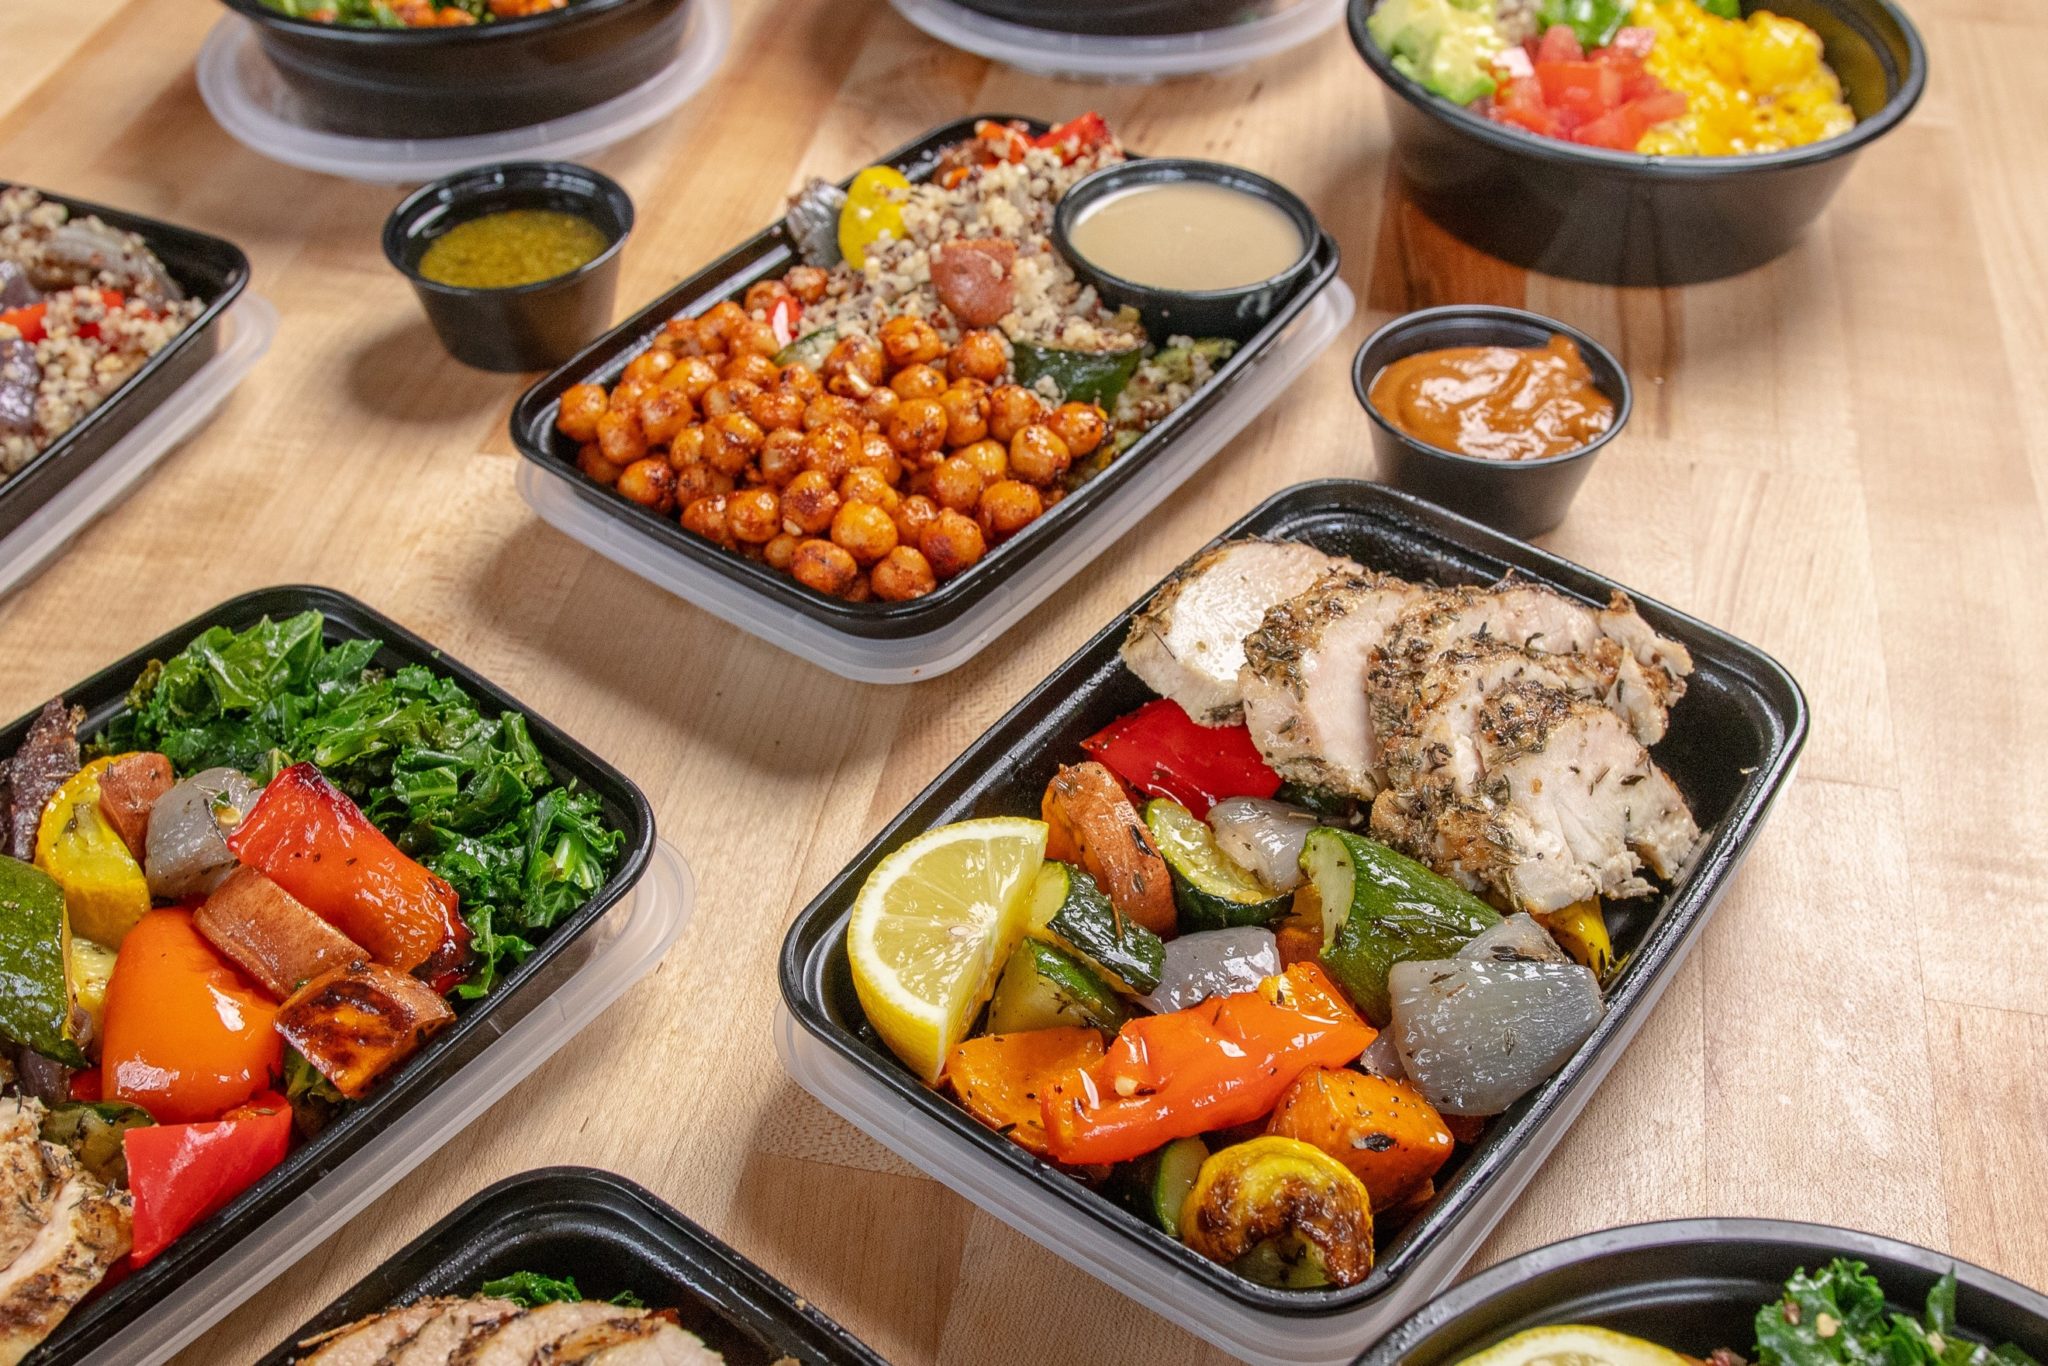 Learn how to Meal Prep for Choosy Eaters